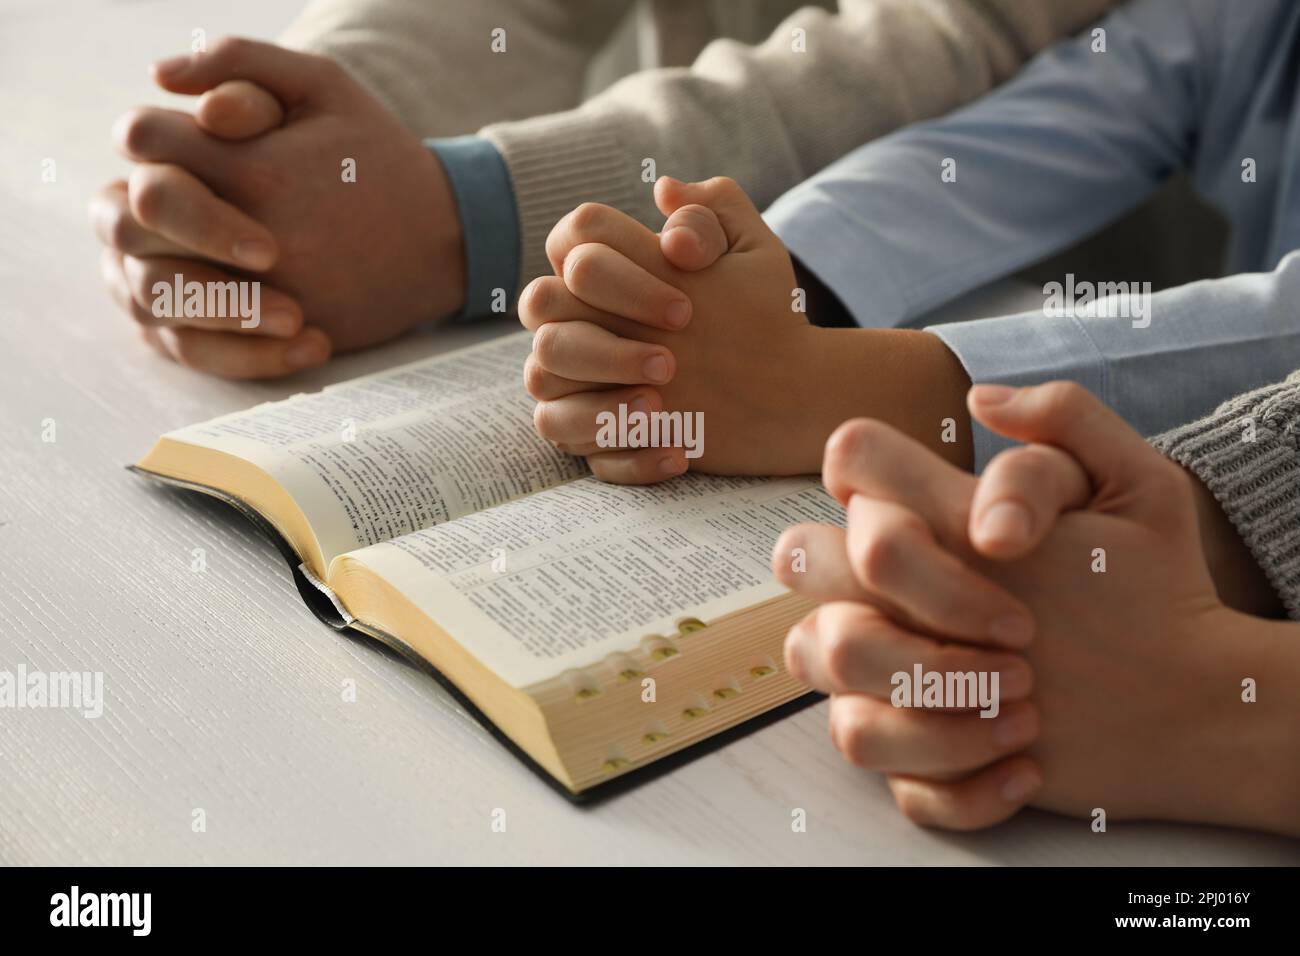 Boy and his godparents praying together at white wooden table, closeup Stock Photo